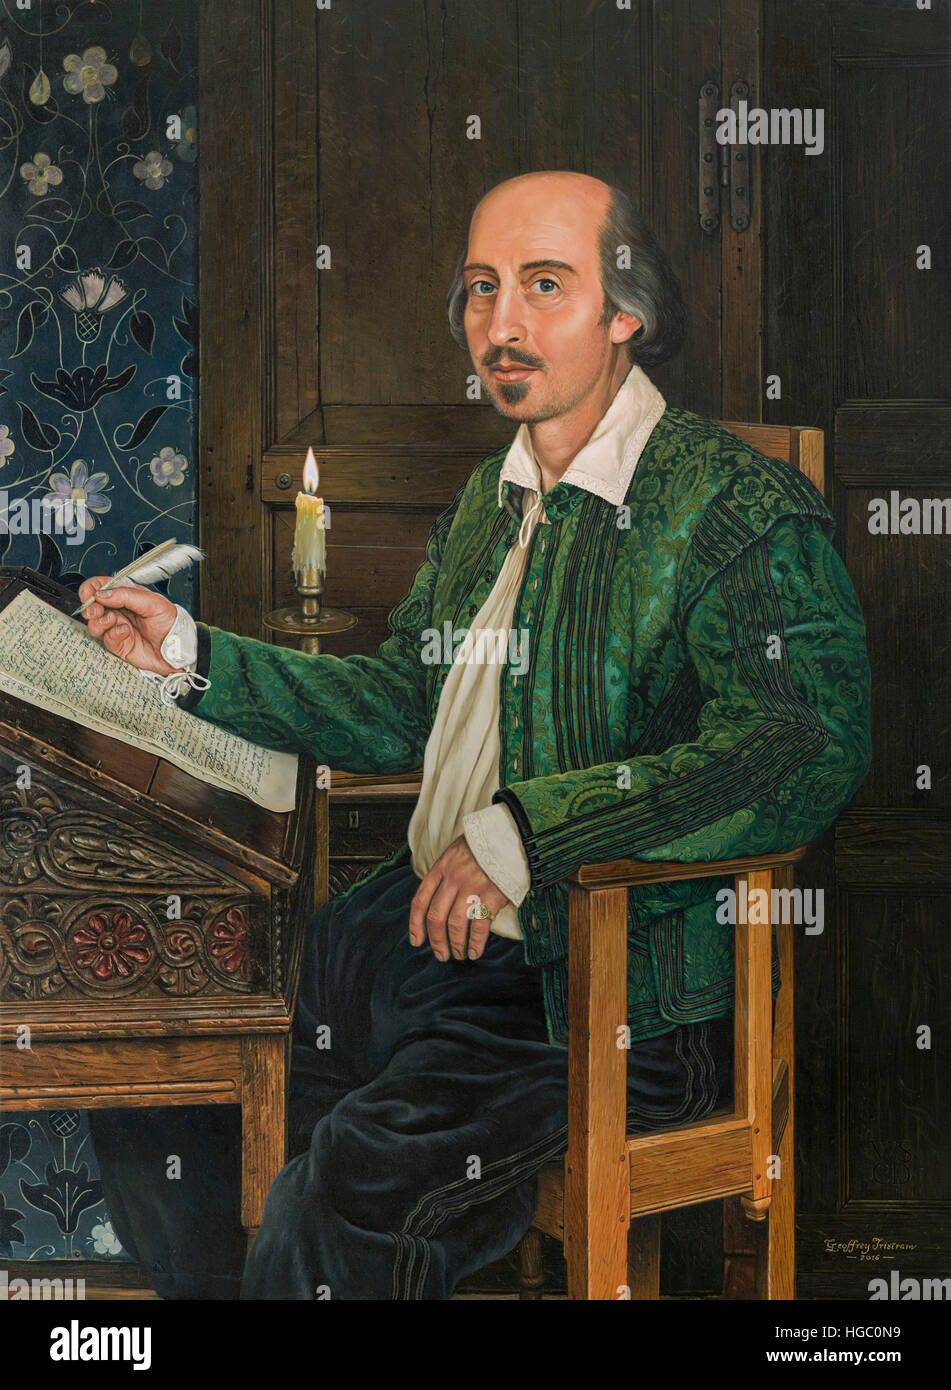 The 400th Anniversary Portrait of William Shakespeare by Geoff Tristram, in association with Stratford-upon-Avon's Council. Stock Photo